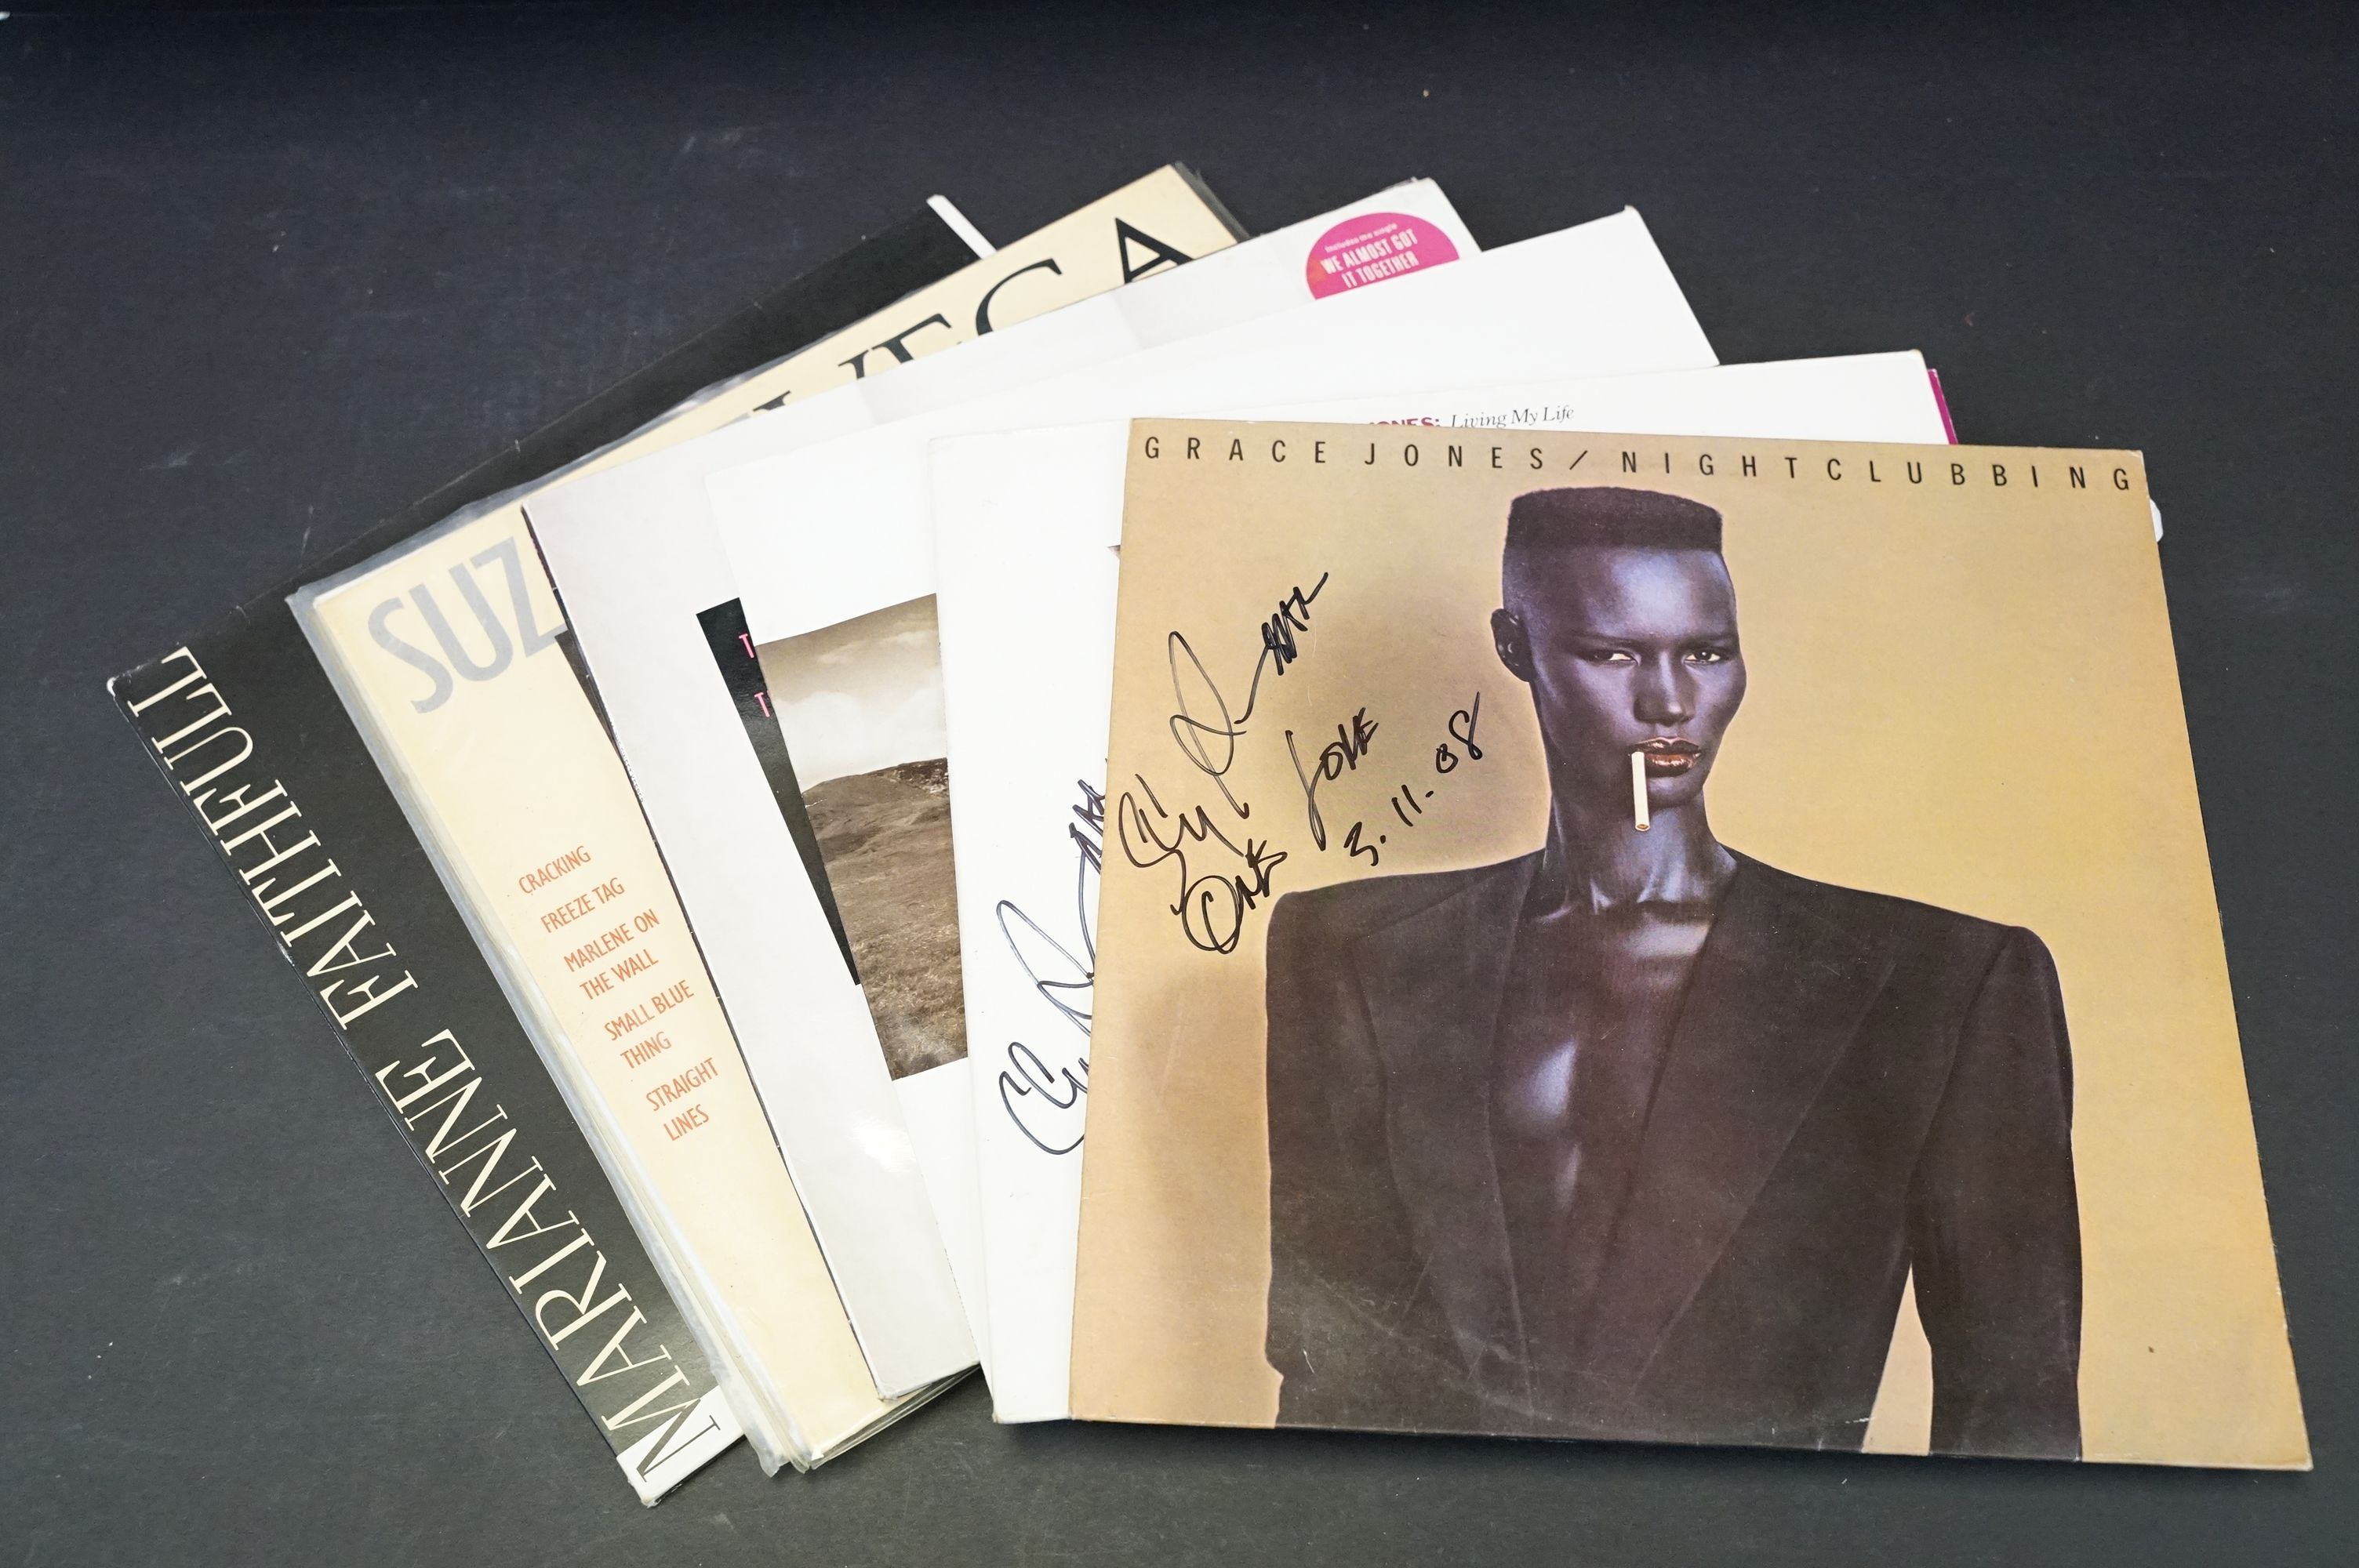 Vinyl / Autographs - Over 60 albums by female artists all signed by the artist or members of the - Image 3 of 4